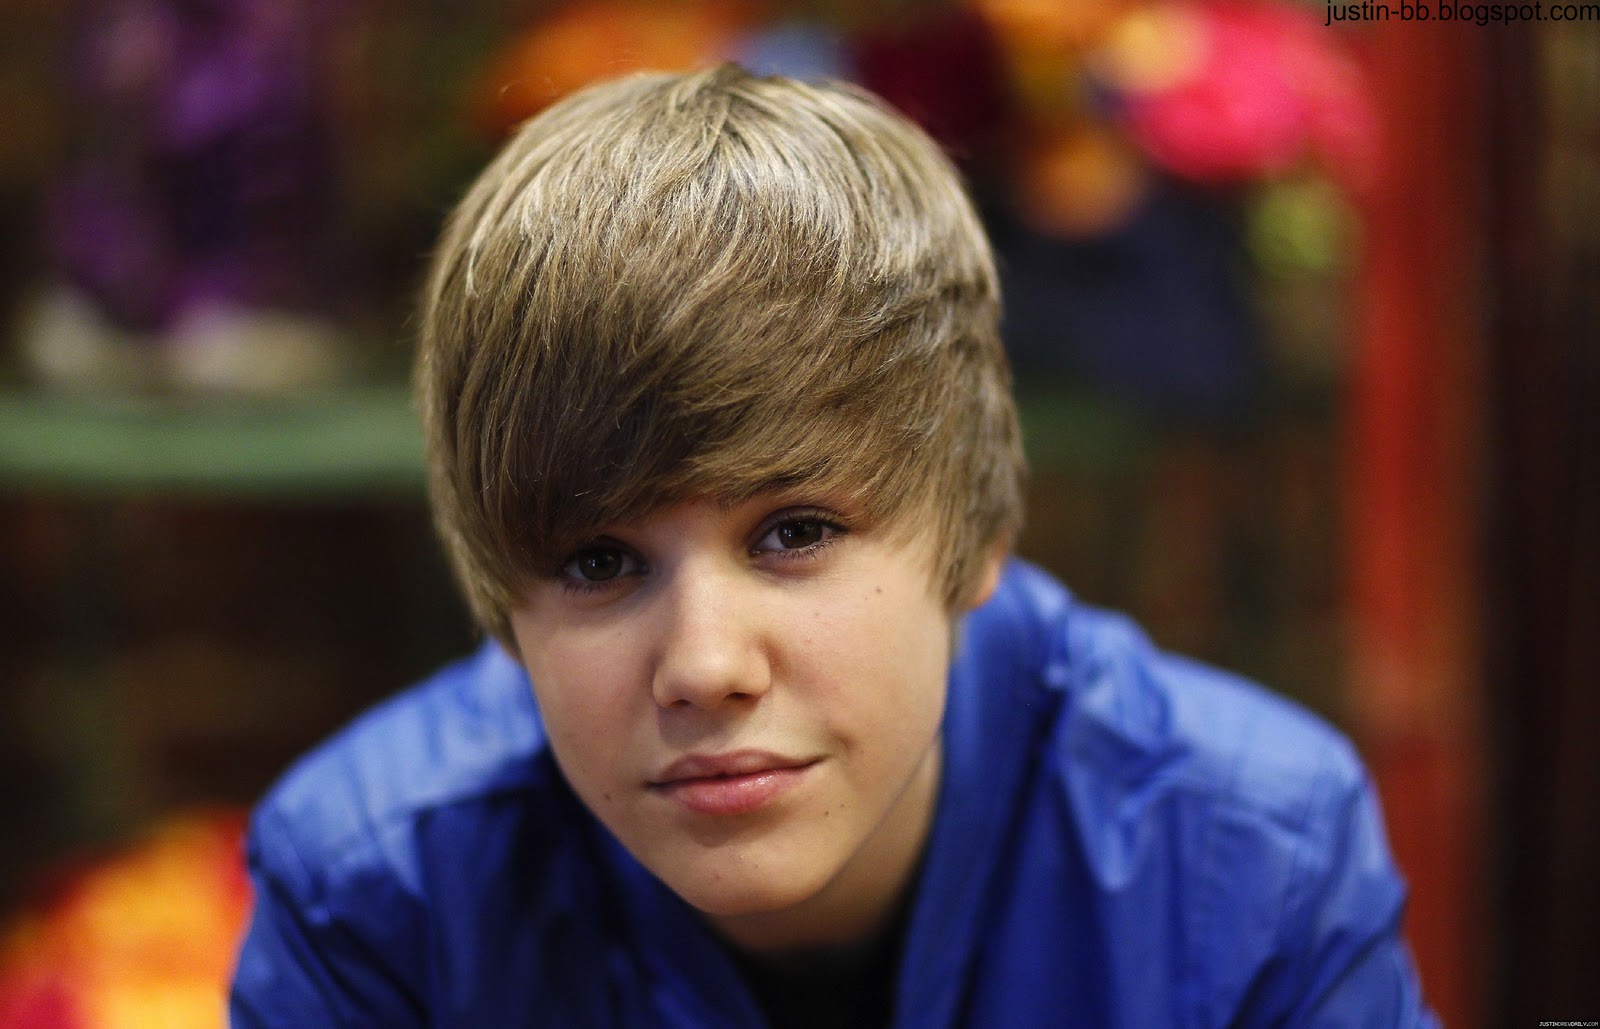 ALL ABOUT HOLLYWOOD STARS: Justin Bieber Profile And Pics1600 x 1029